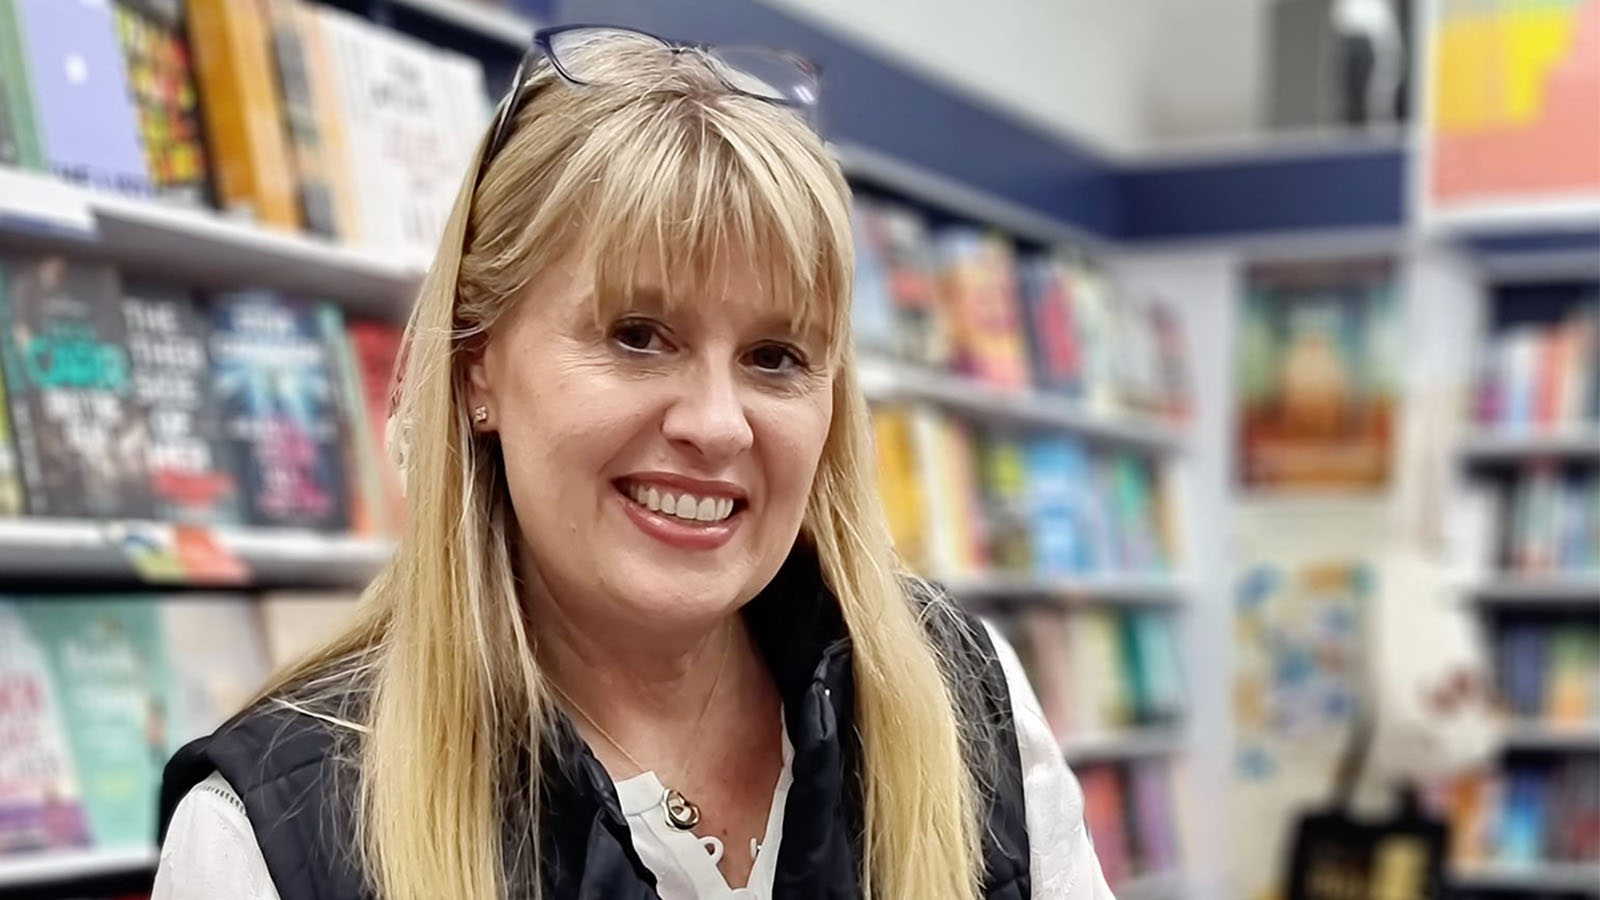 A woman with blonde hair is standing in a bookshop, smiling.